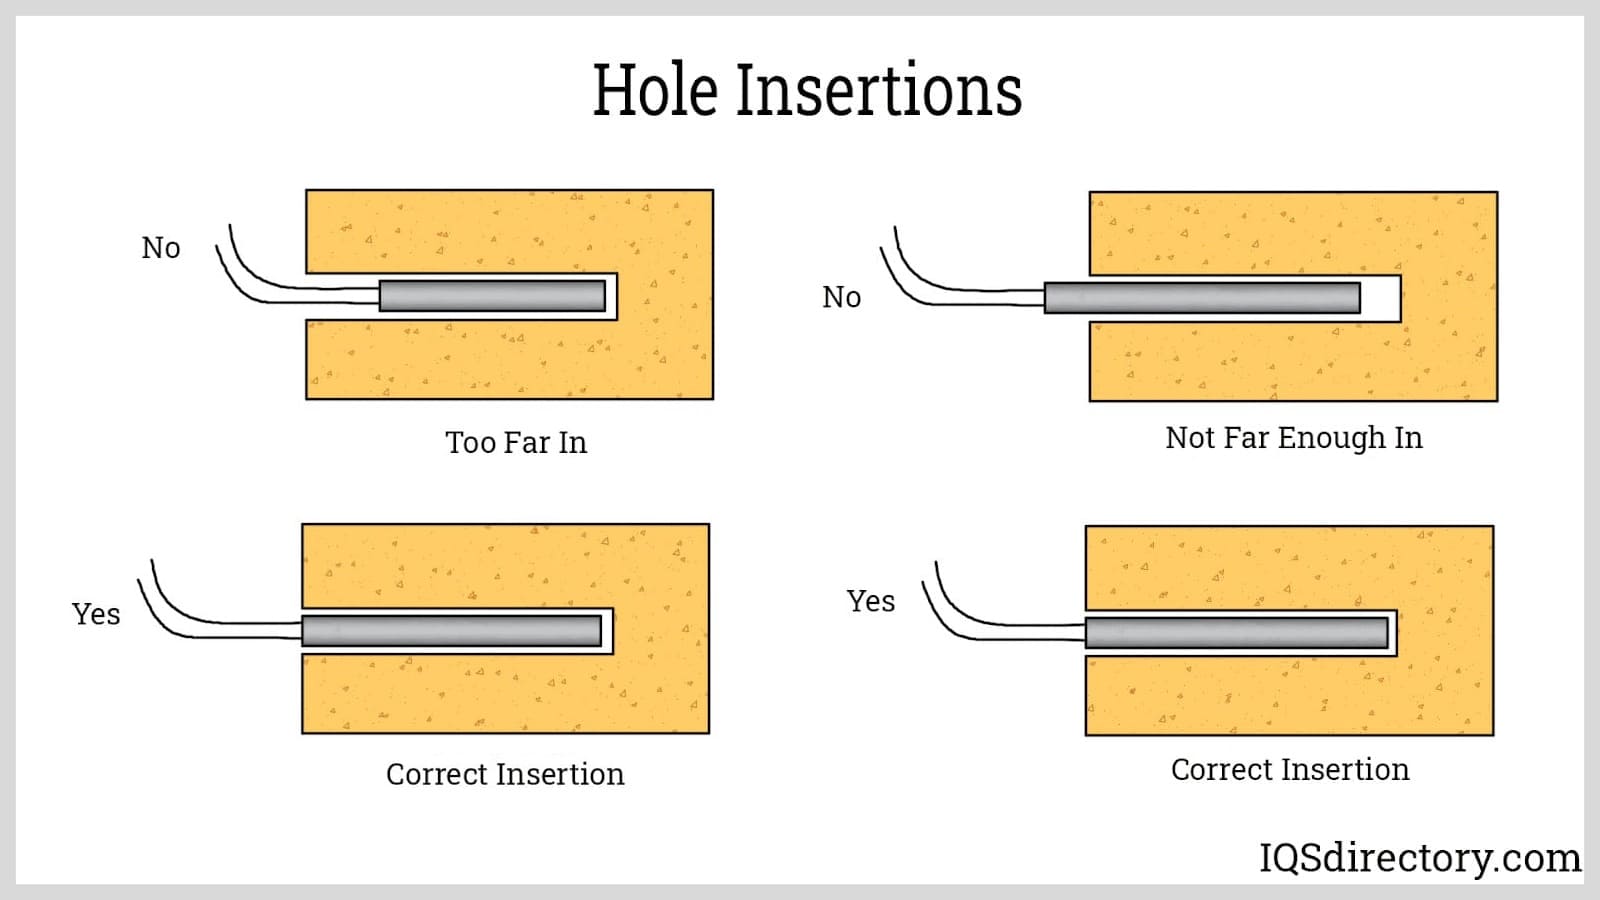 Hole Insertions